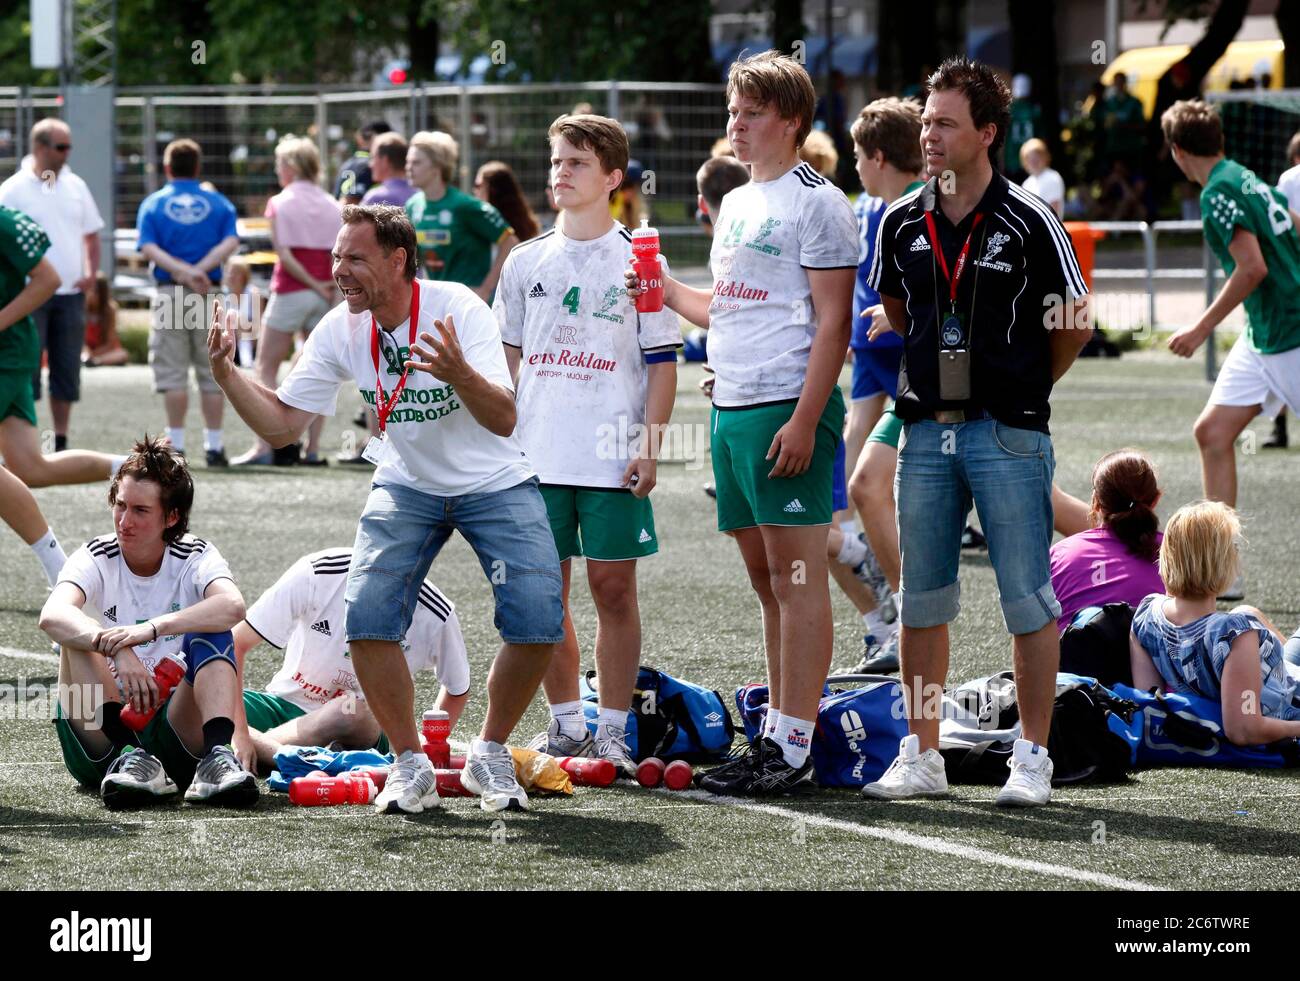 Gothenburg, Sweden 20120705 Over 20,000 handball players participate in the  handball tournament Partille cup. Photo Jeppe Gustafsson Stock Photo - Alamy